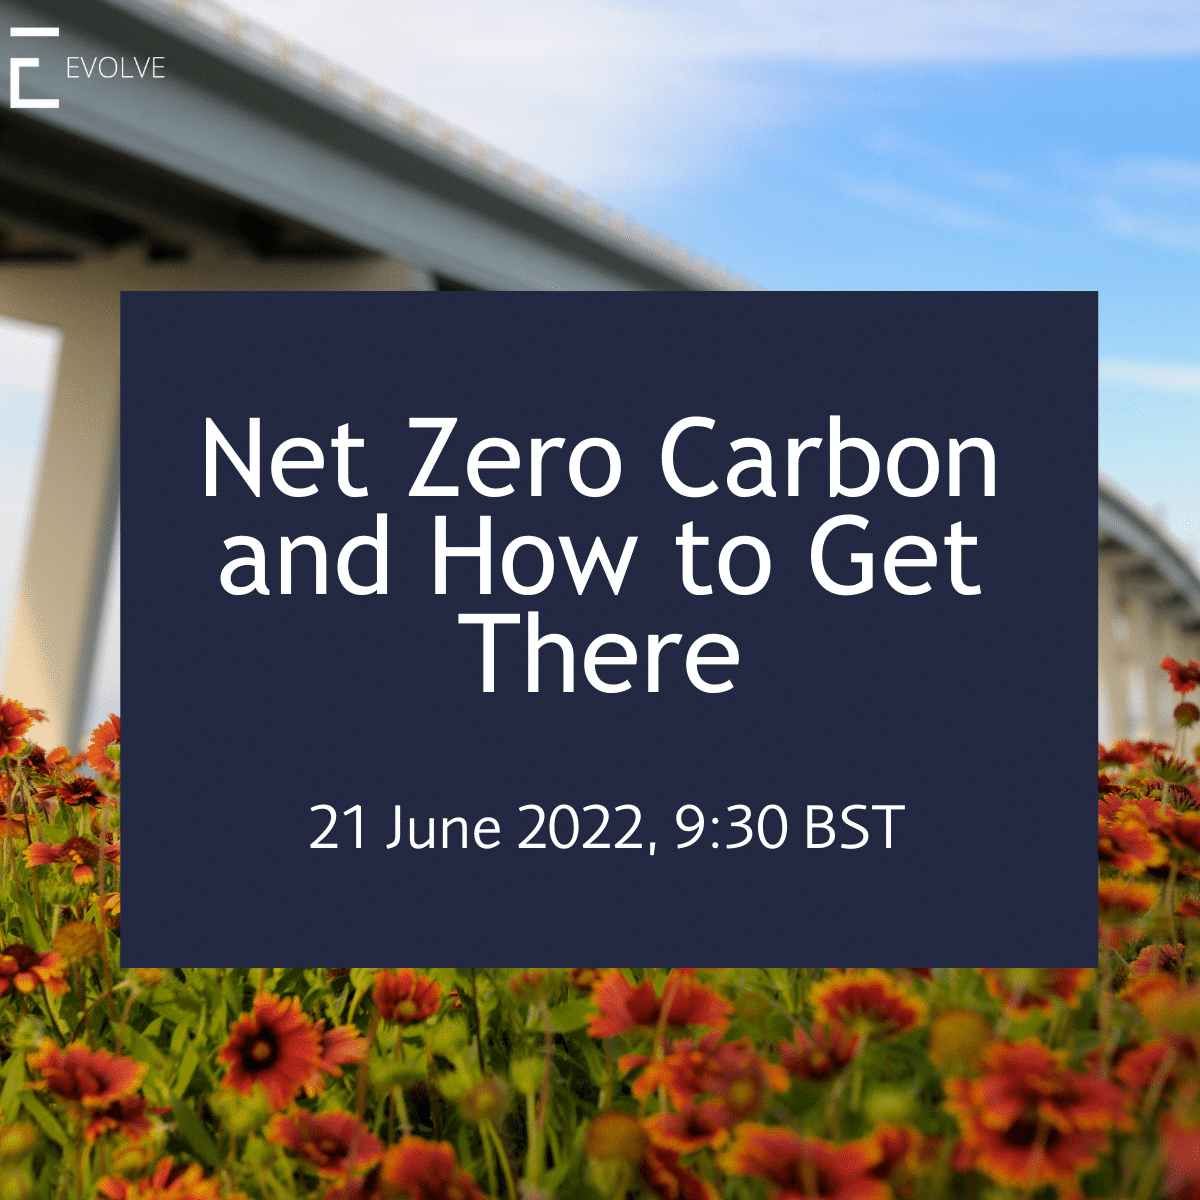 Net Zero Carbon and how to get there